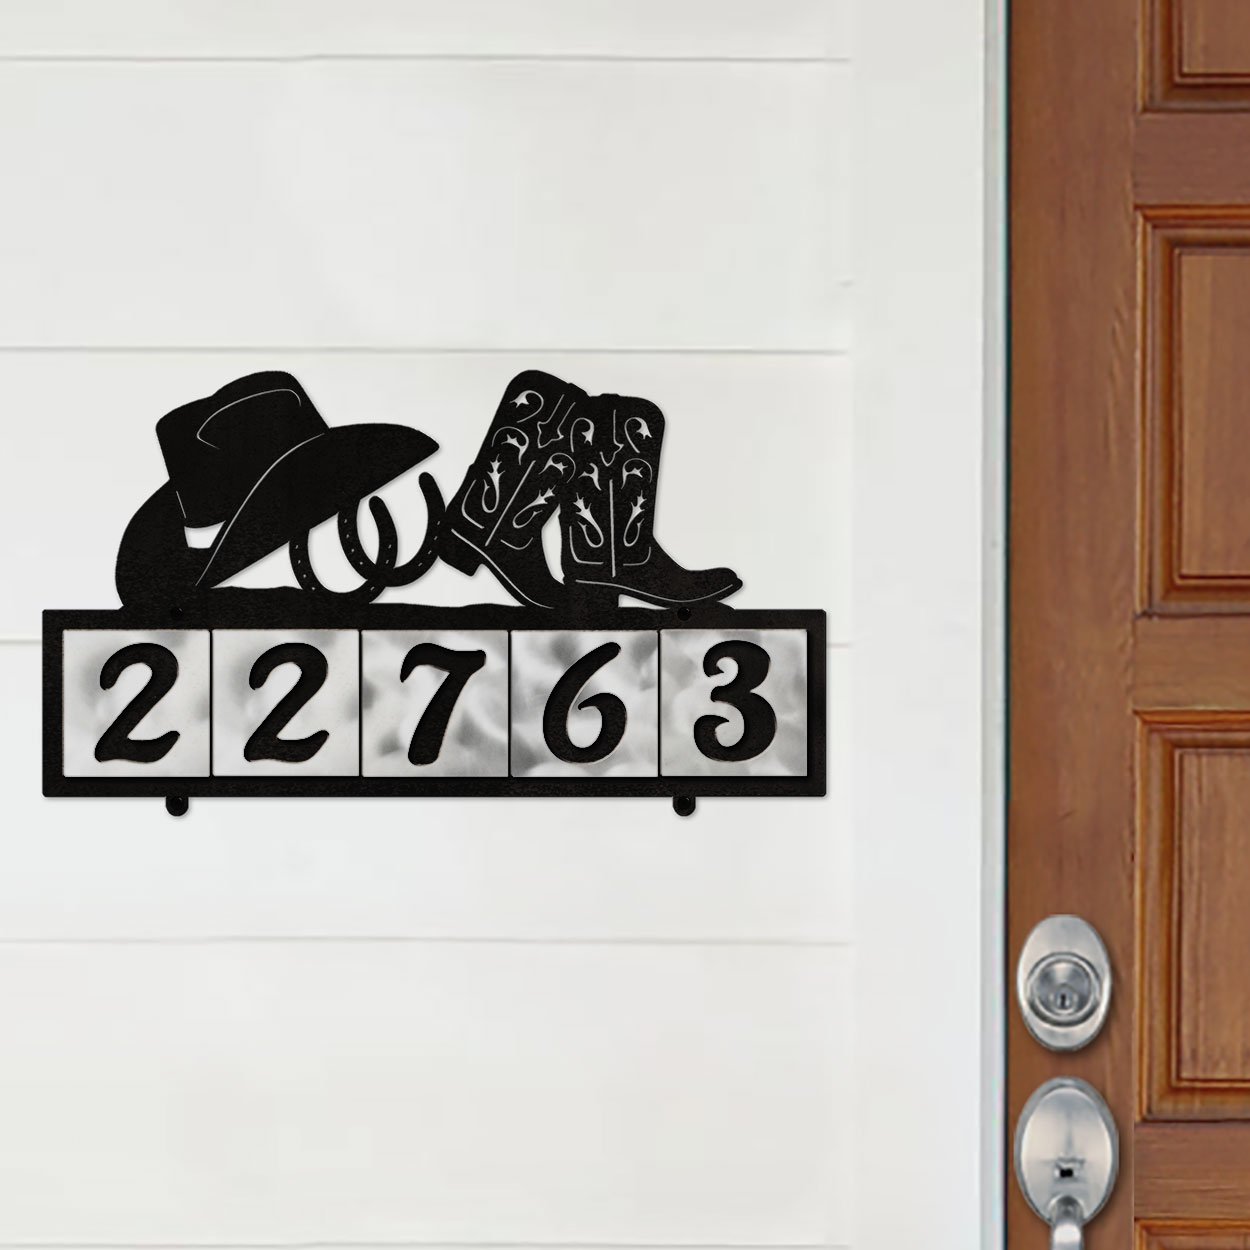 609045 - XL Cowboy Boots with Hat and Horseshoes Design 5-Digit Horizontal 6in Tile Outdoor House Numbers